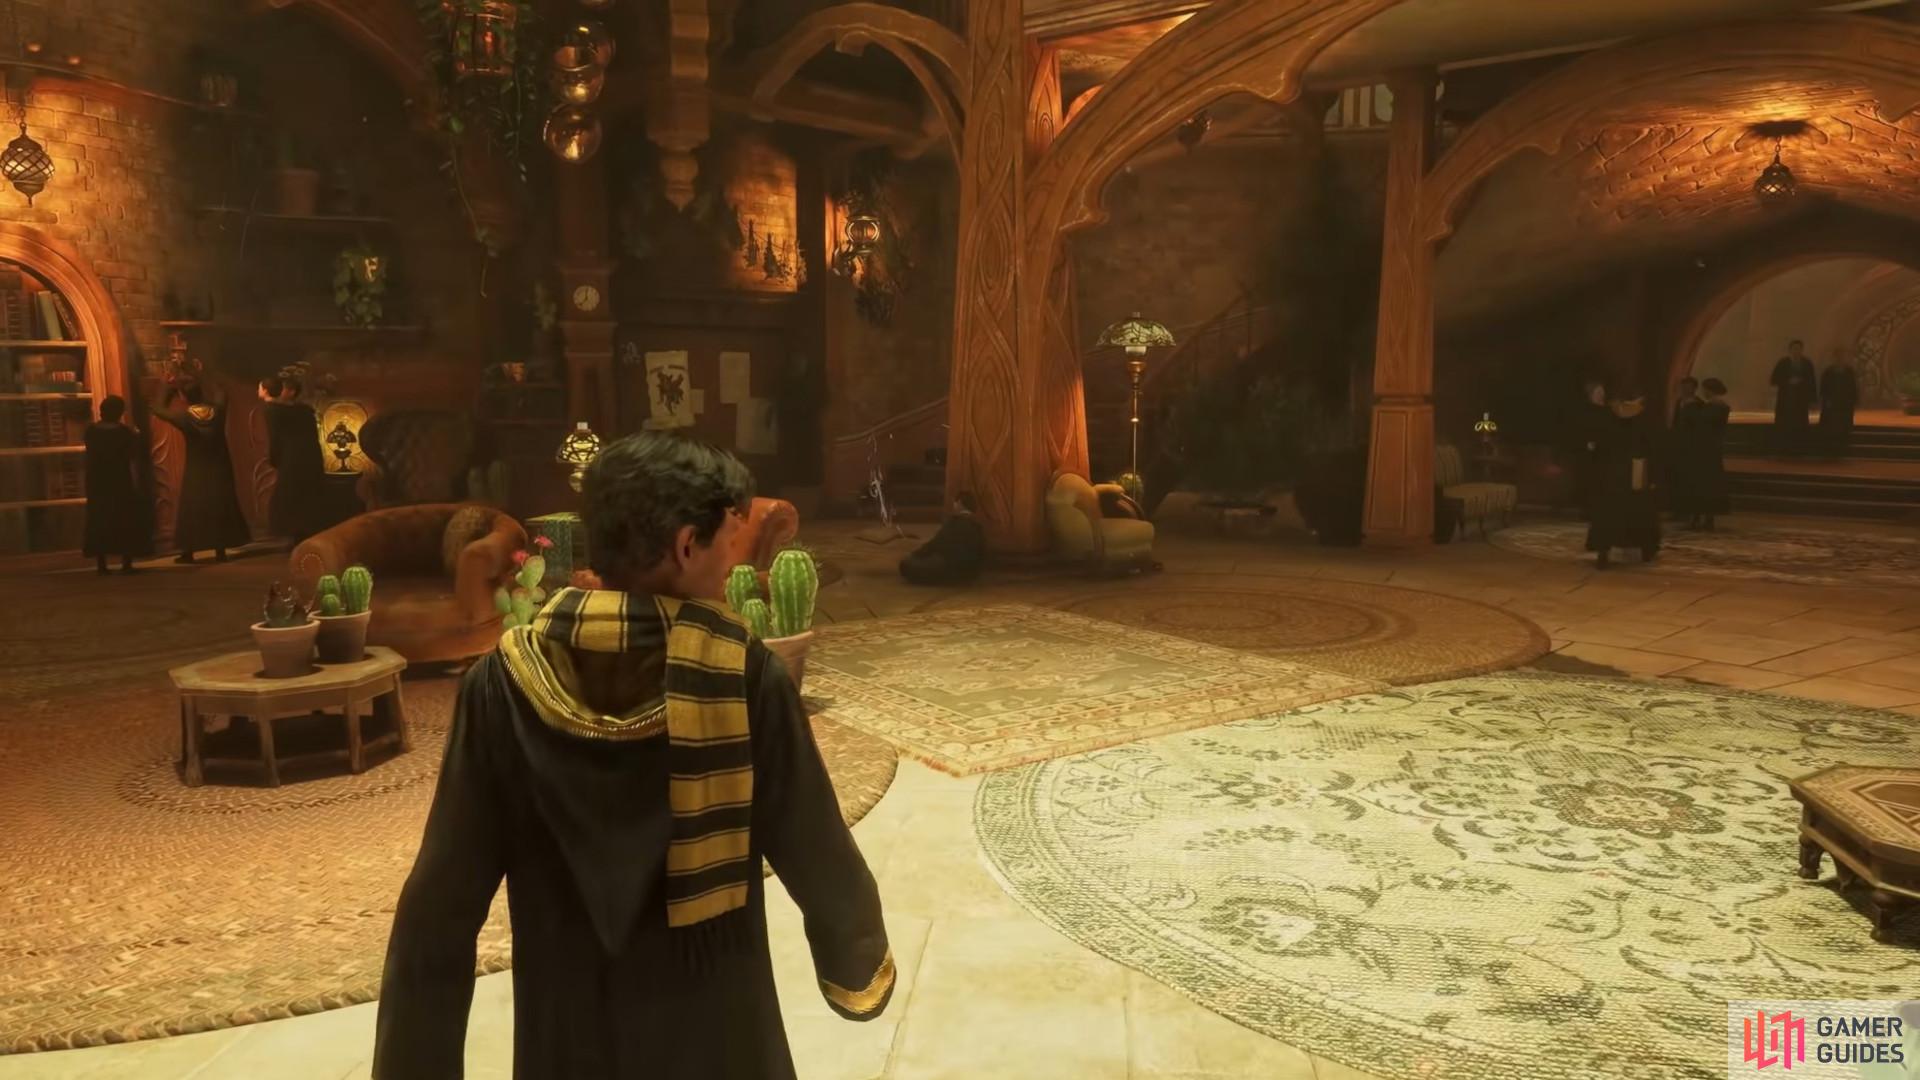 The Hogwarts Legacy Hufflepuff Common Room has a gilded and plant aesthetic. Image via Warner Brothers.